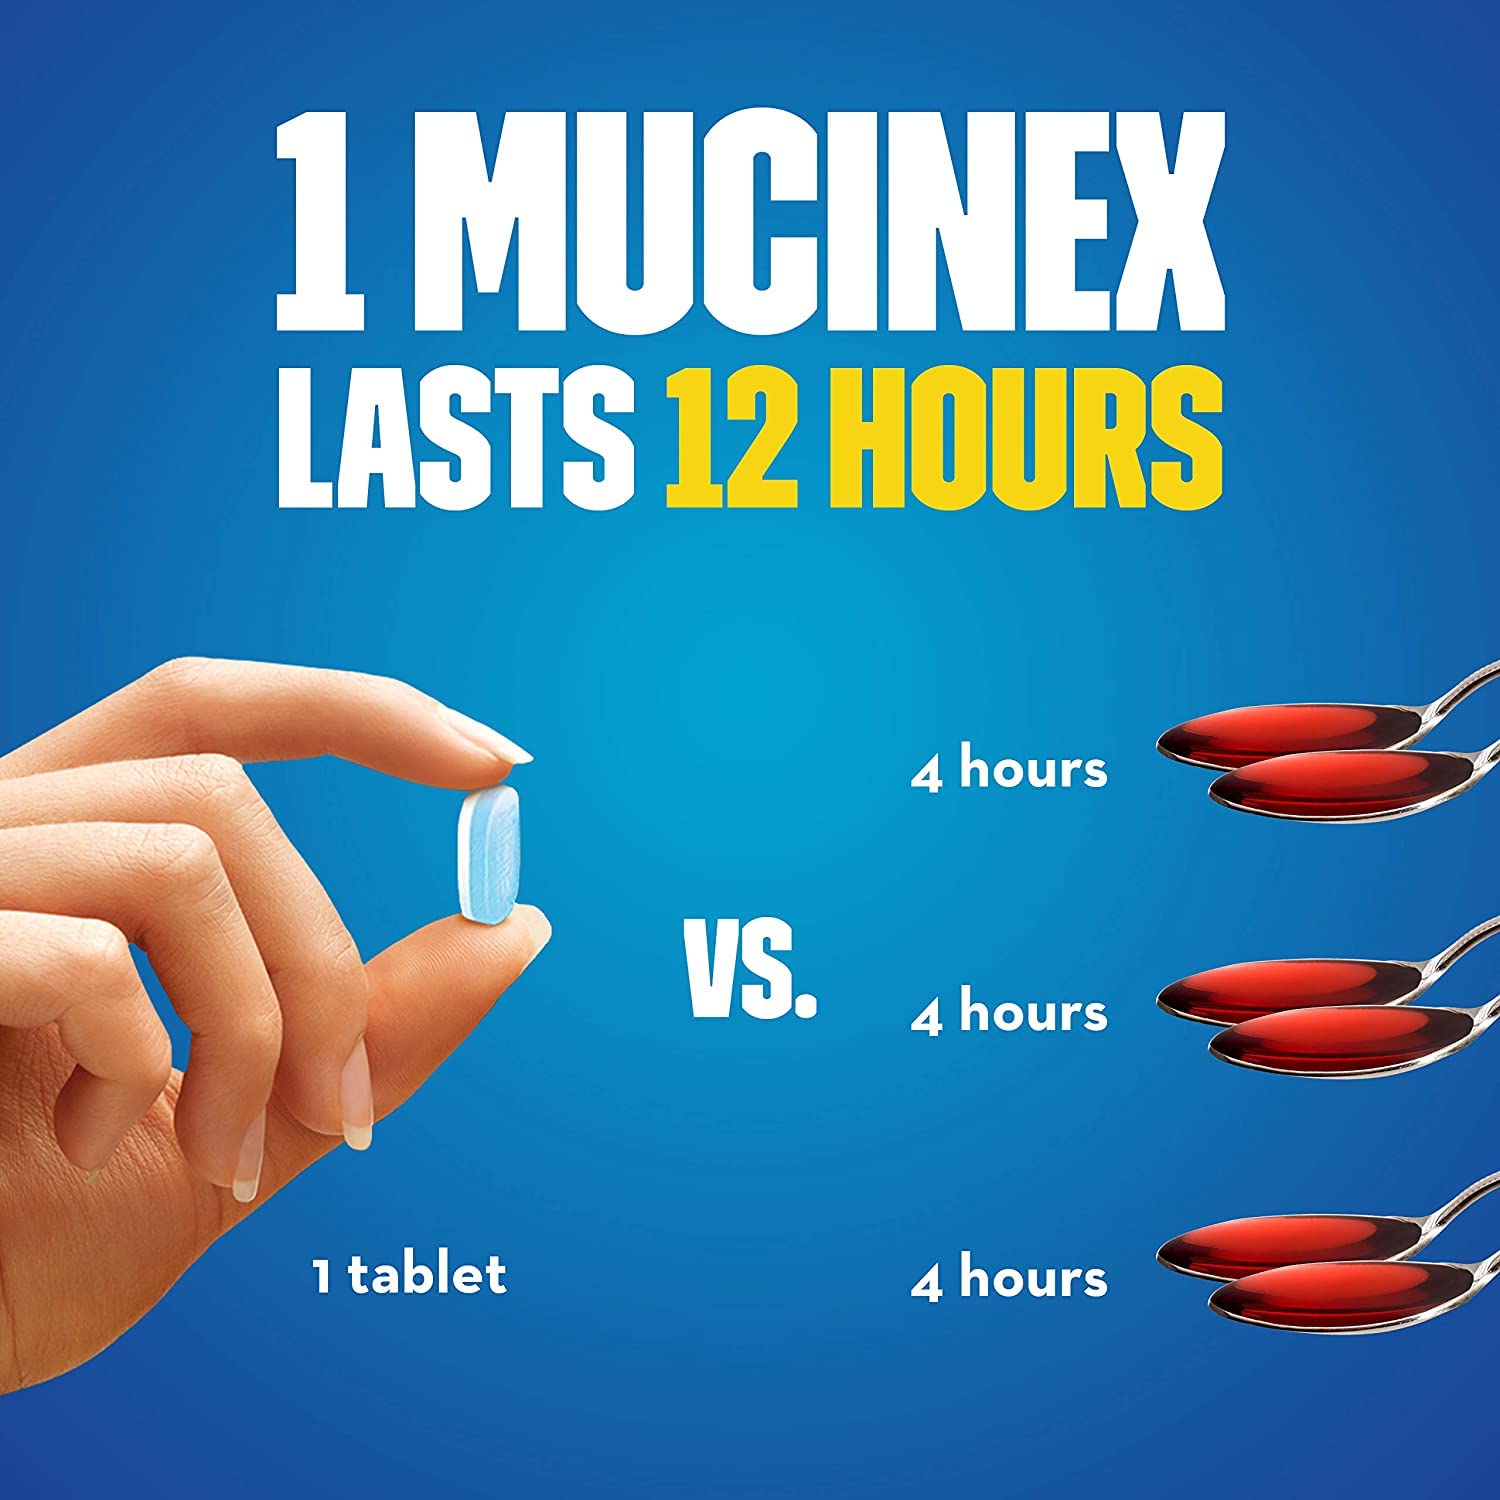 Mucinex Maximum Strength 12 Hour Chest Congestion Medicine, Chest Congestion Relief, Expectorant, Lasts 12 Hours, Powerful Symptom Relief, Extended-Release Bi-Layer Tablets, 42 Count (Pack of 3)